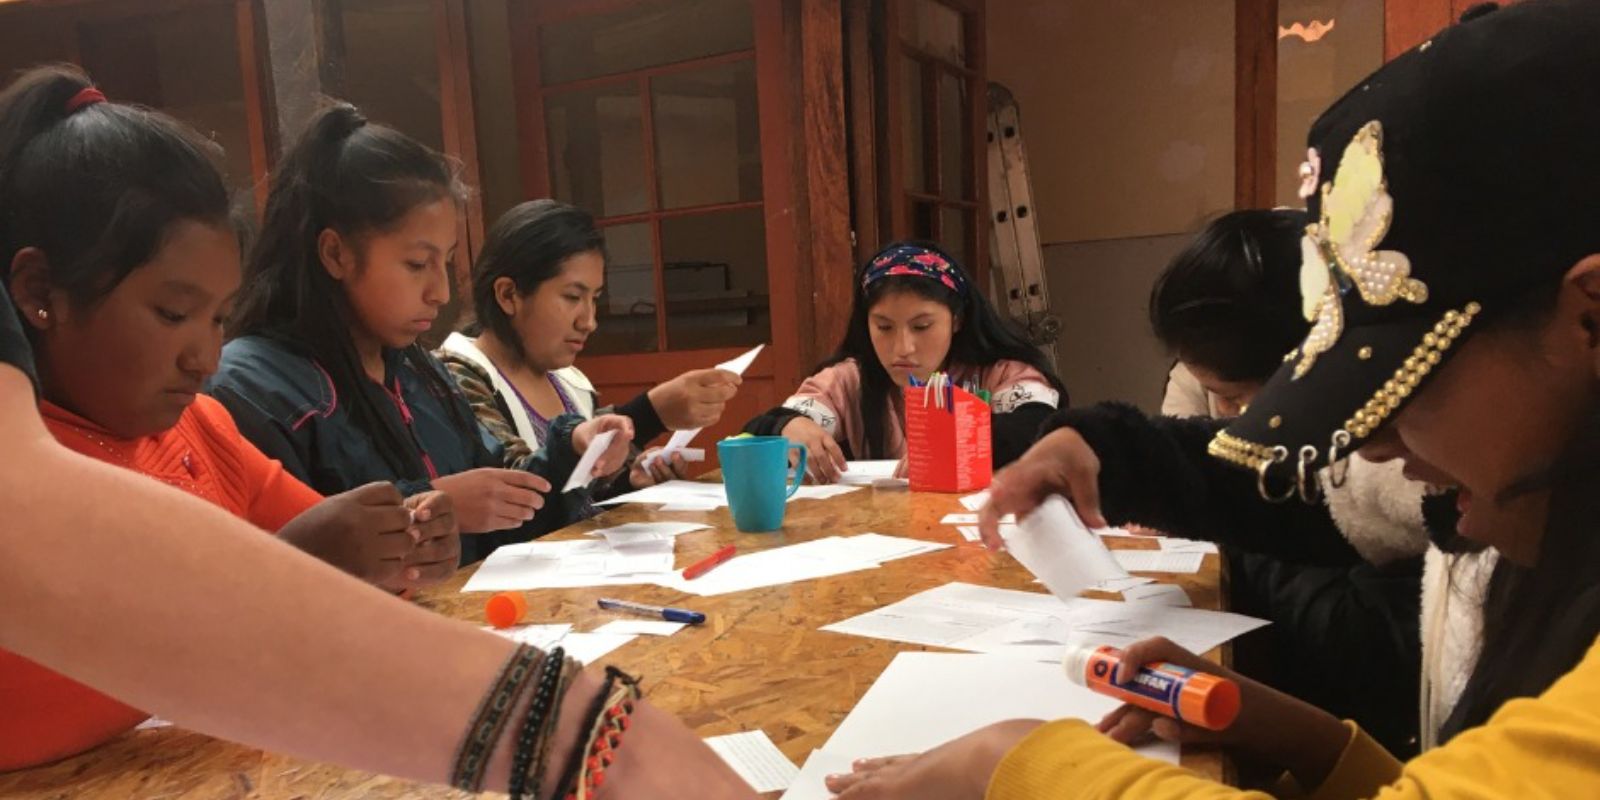 A group of girls working on papers at a table